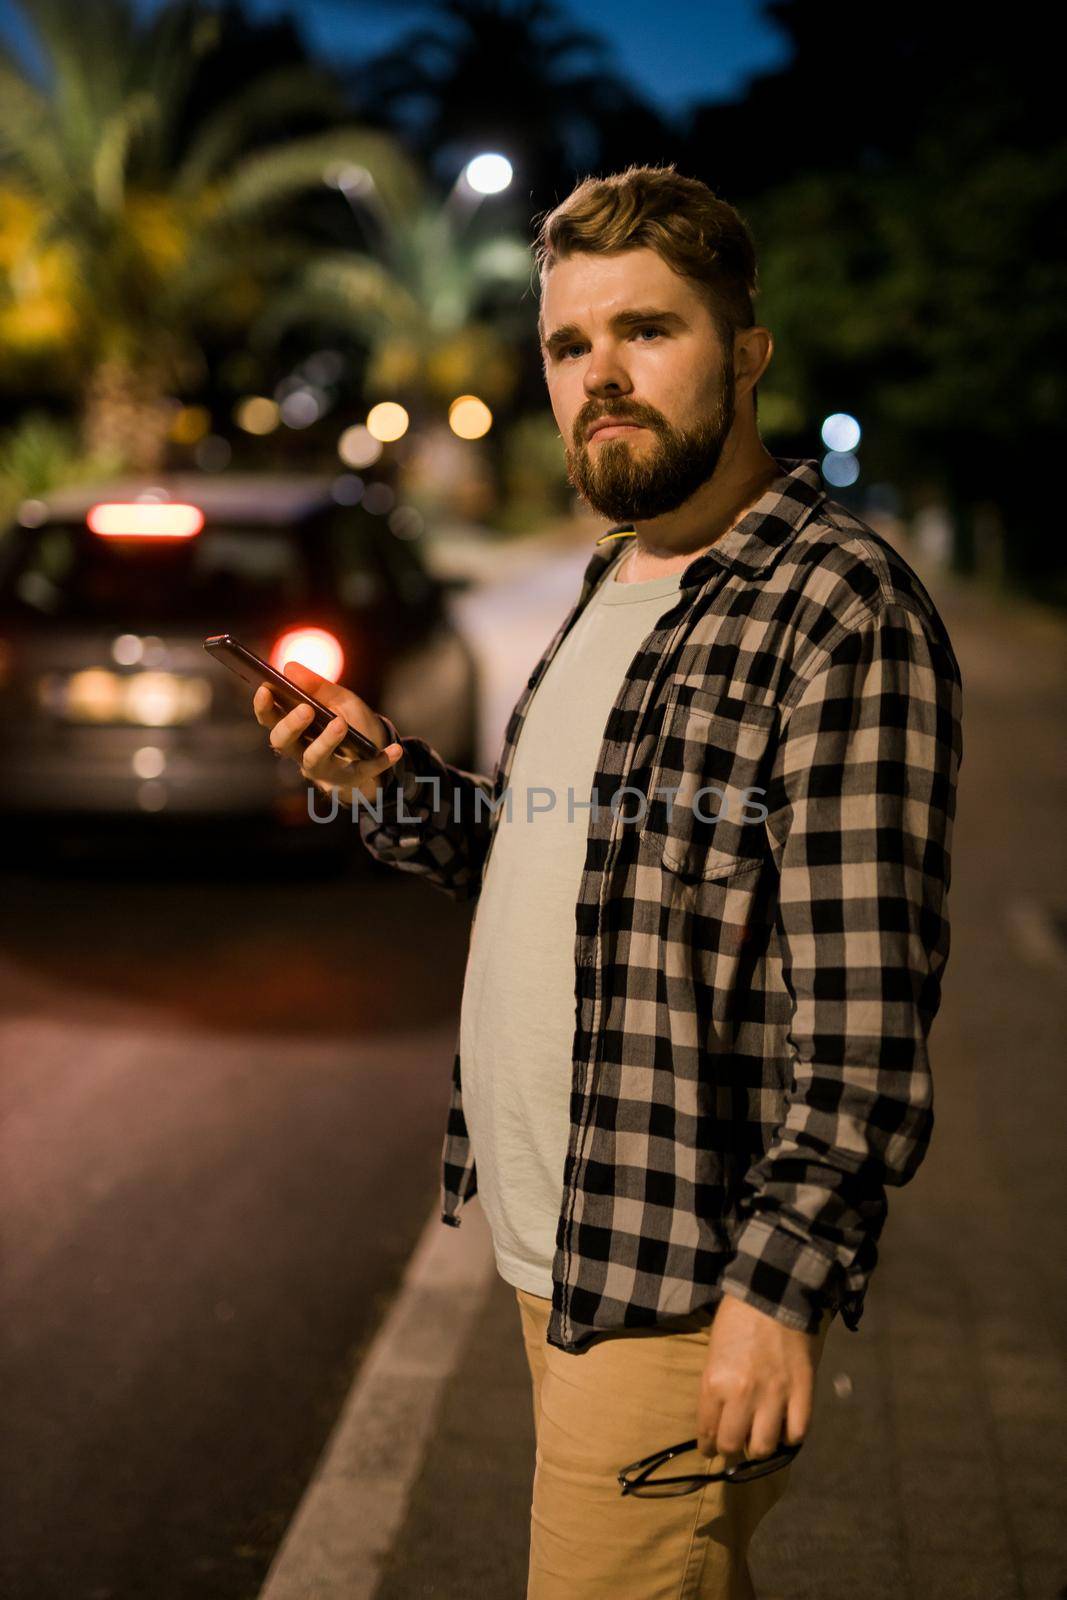 Man waits taxi by using transportation app on night street. Technologies and city concept by Satura86